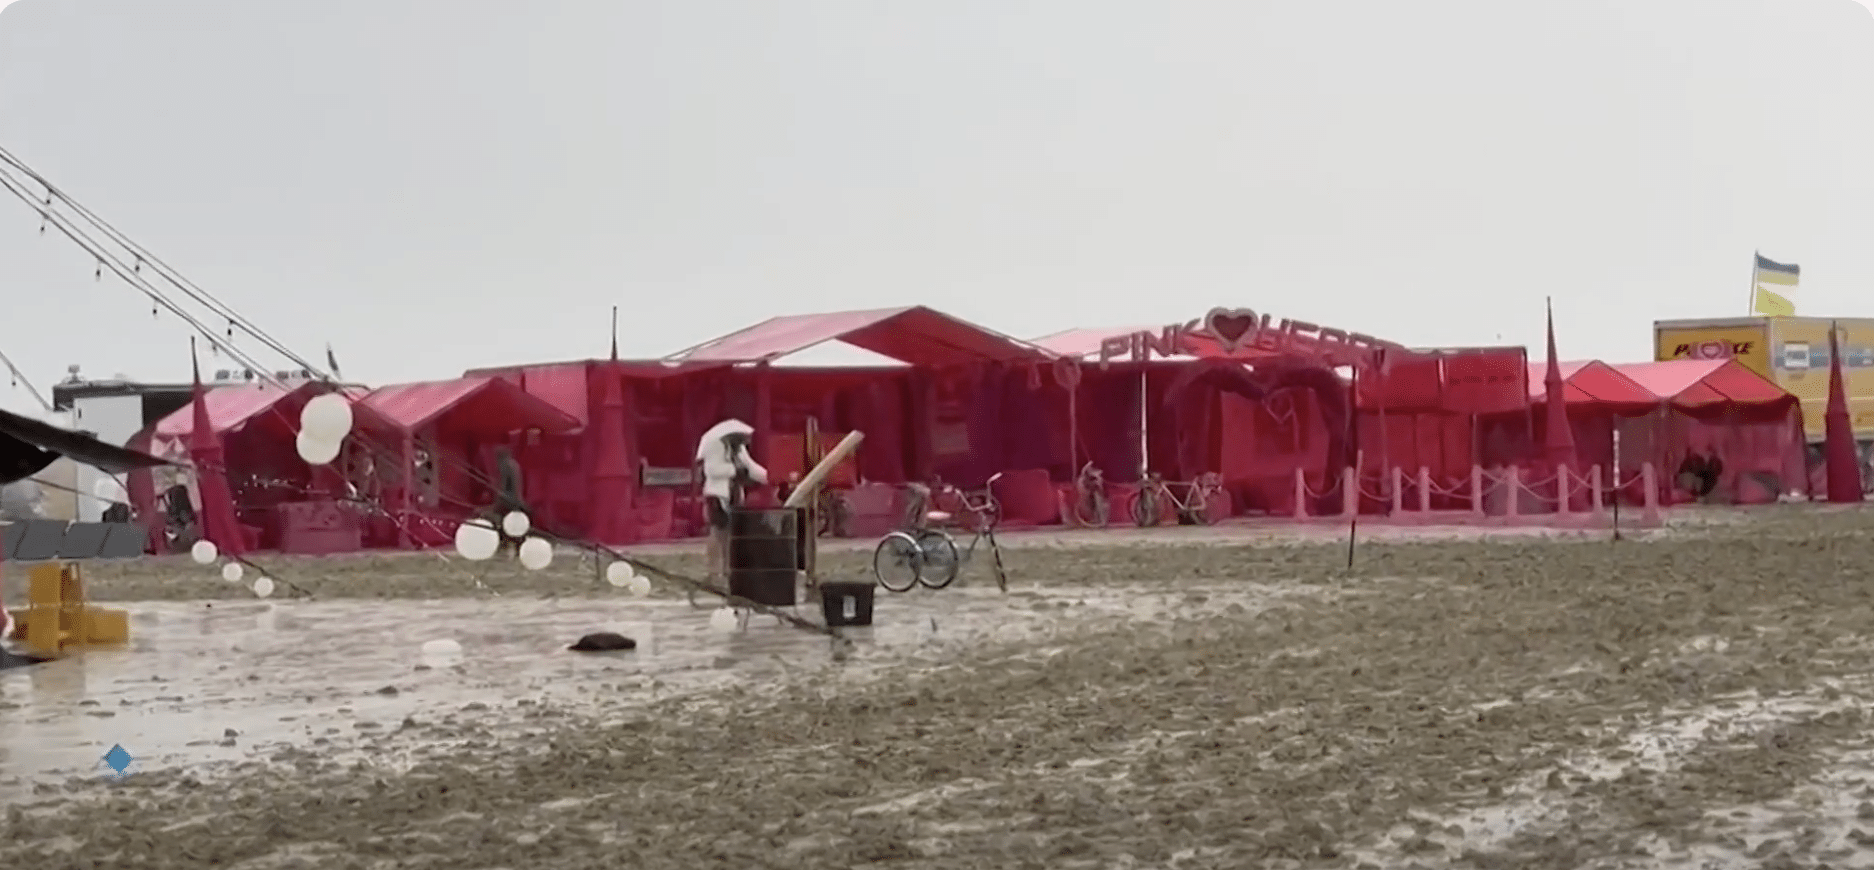 Sodom and Gomorrah 2.0 “Burning Man festival” soaked by monsoon downpours, leaves tens of thousands stranded